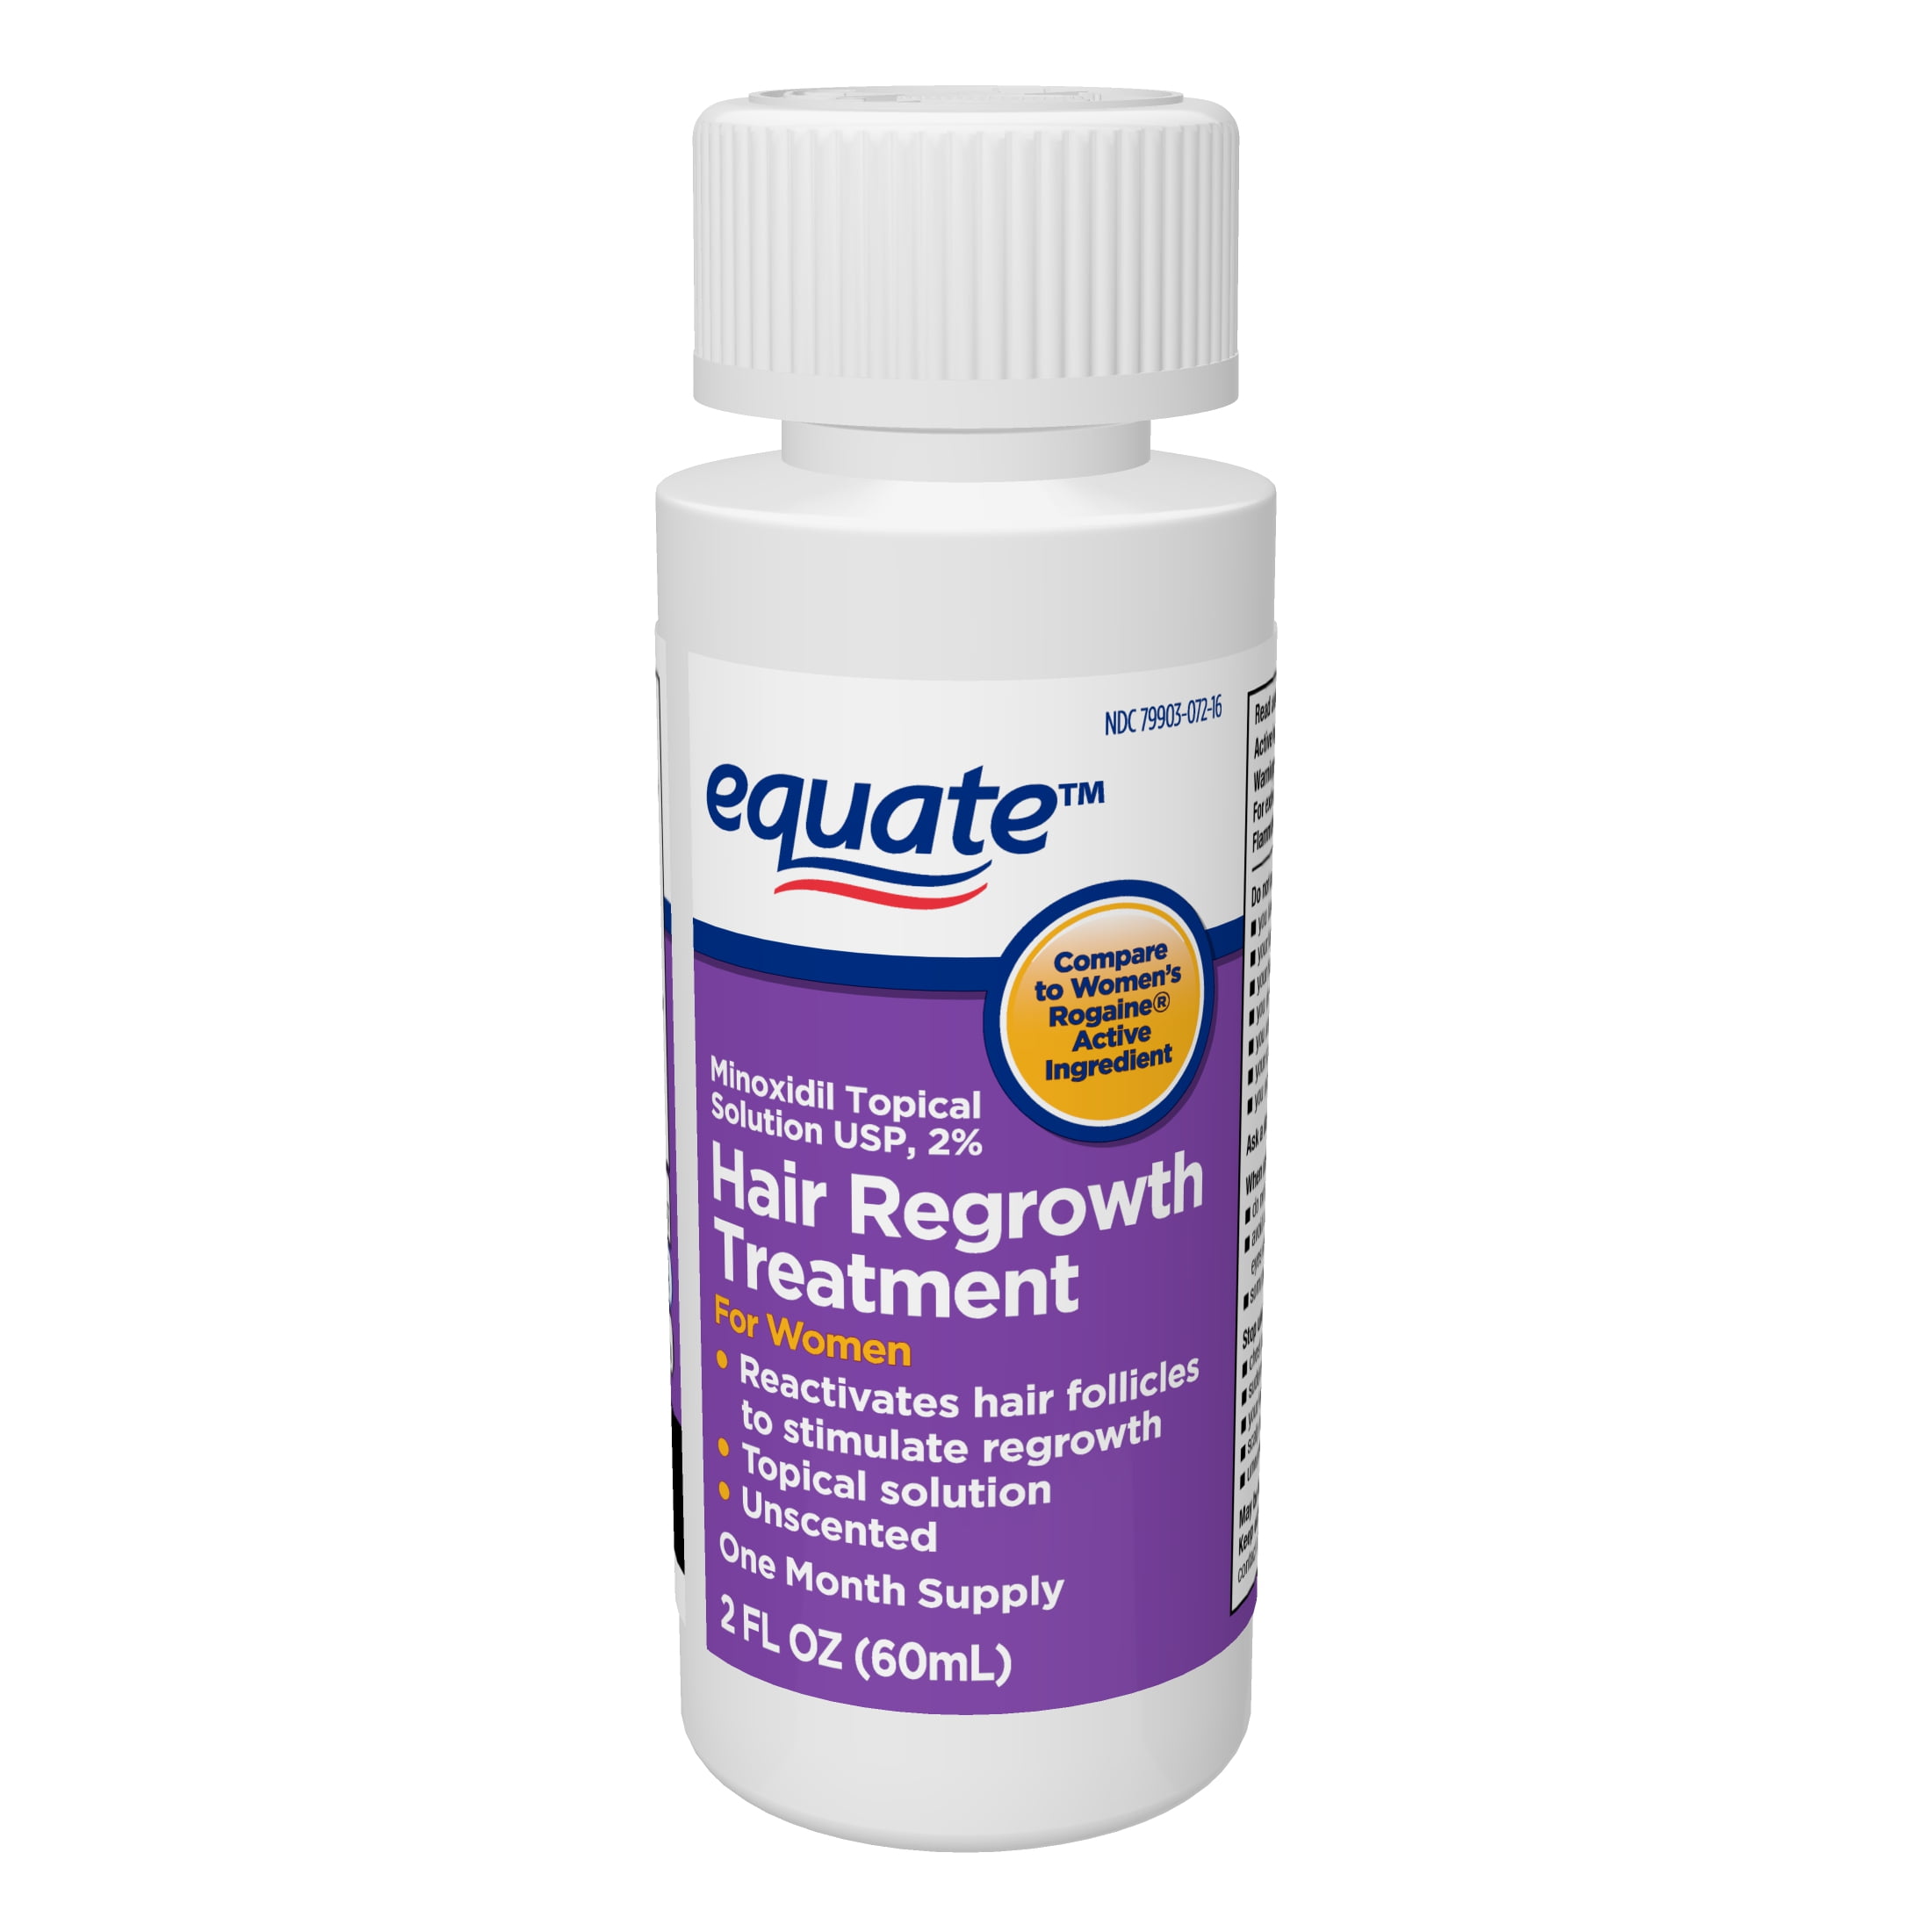 Equate Minoxidil Topical Solution, 2 Percent, Hair Regrowth For Women, 3 month supply - Walmart.com